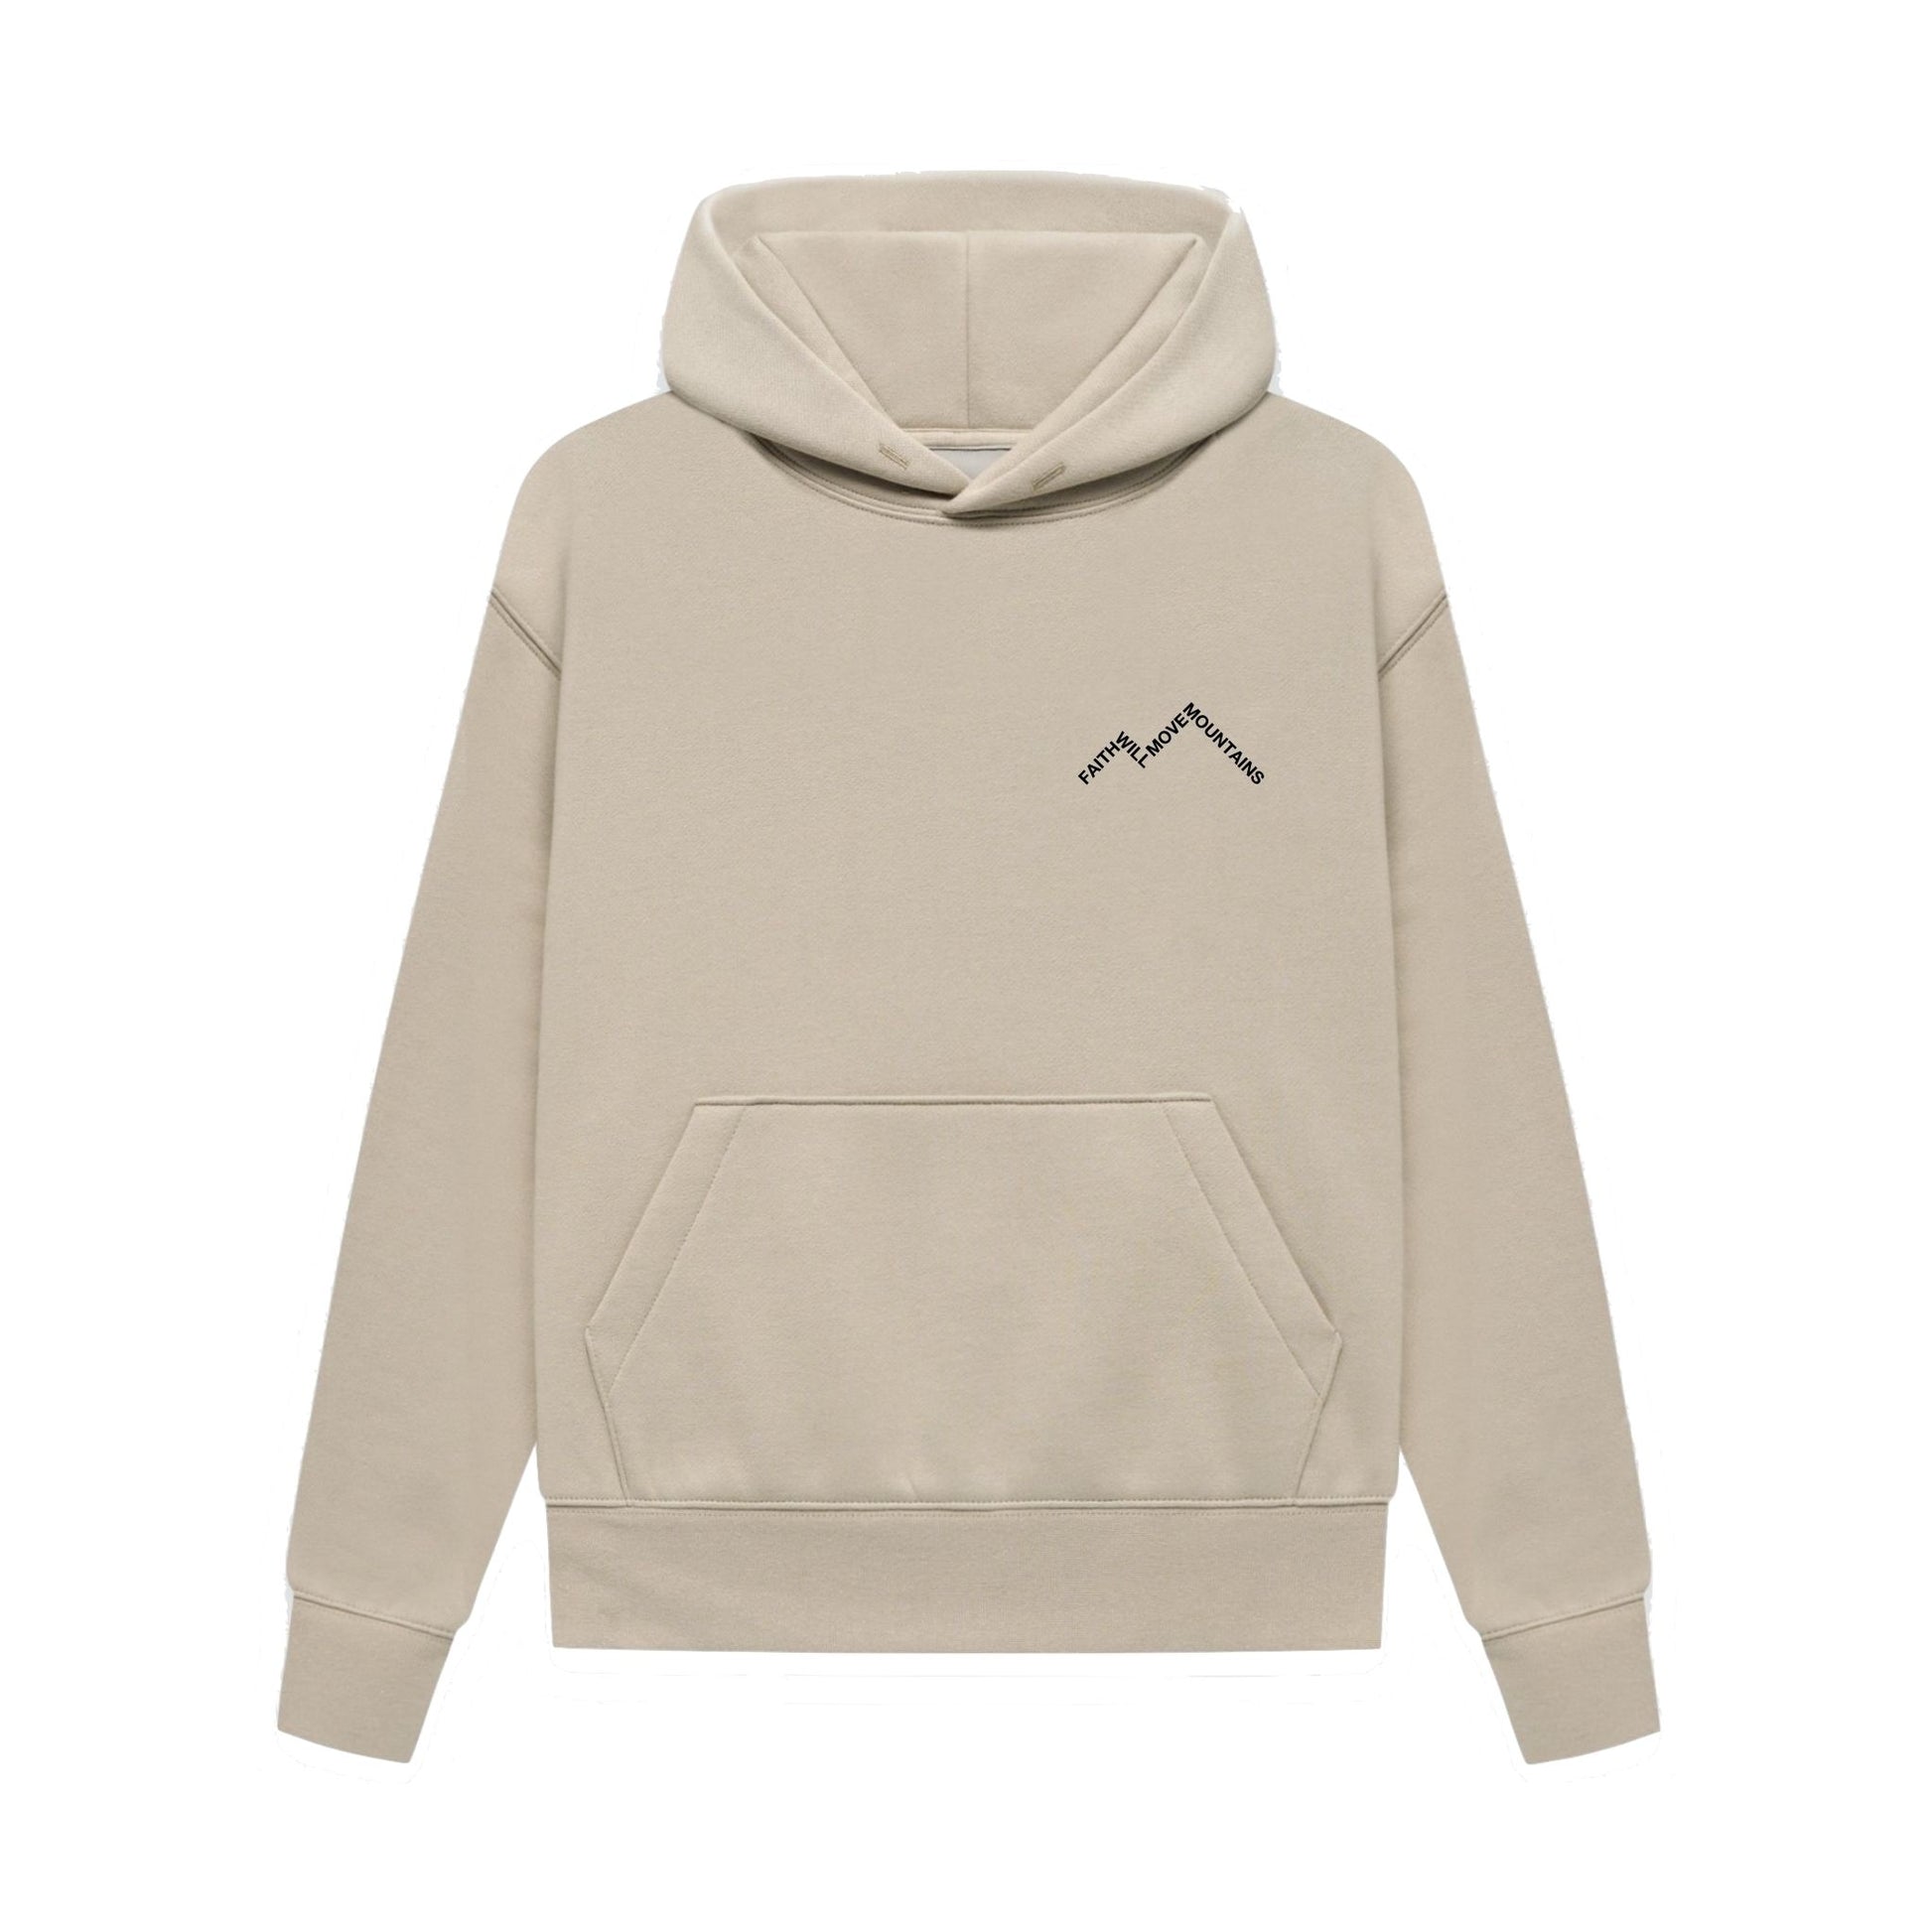 Love Wins - Beige Hoodie – The Get REAL Movement